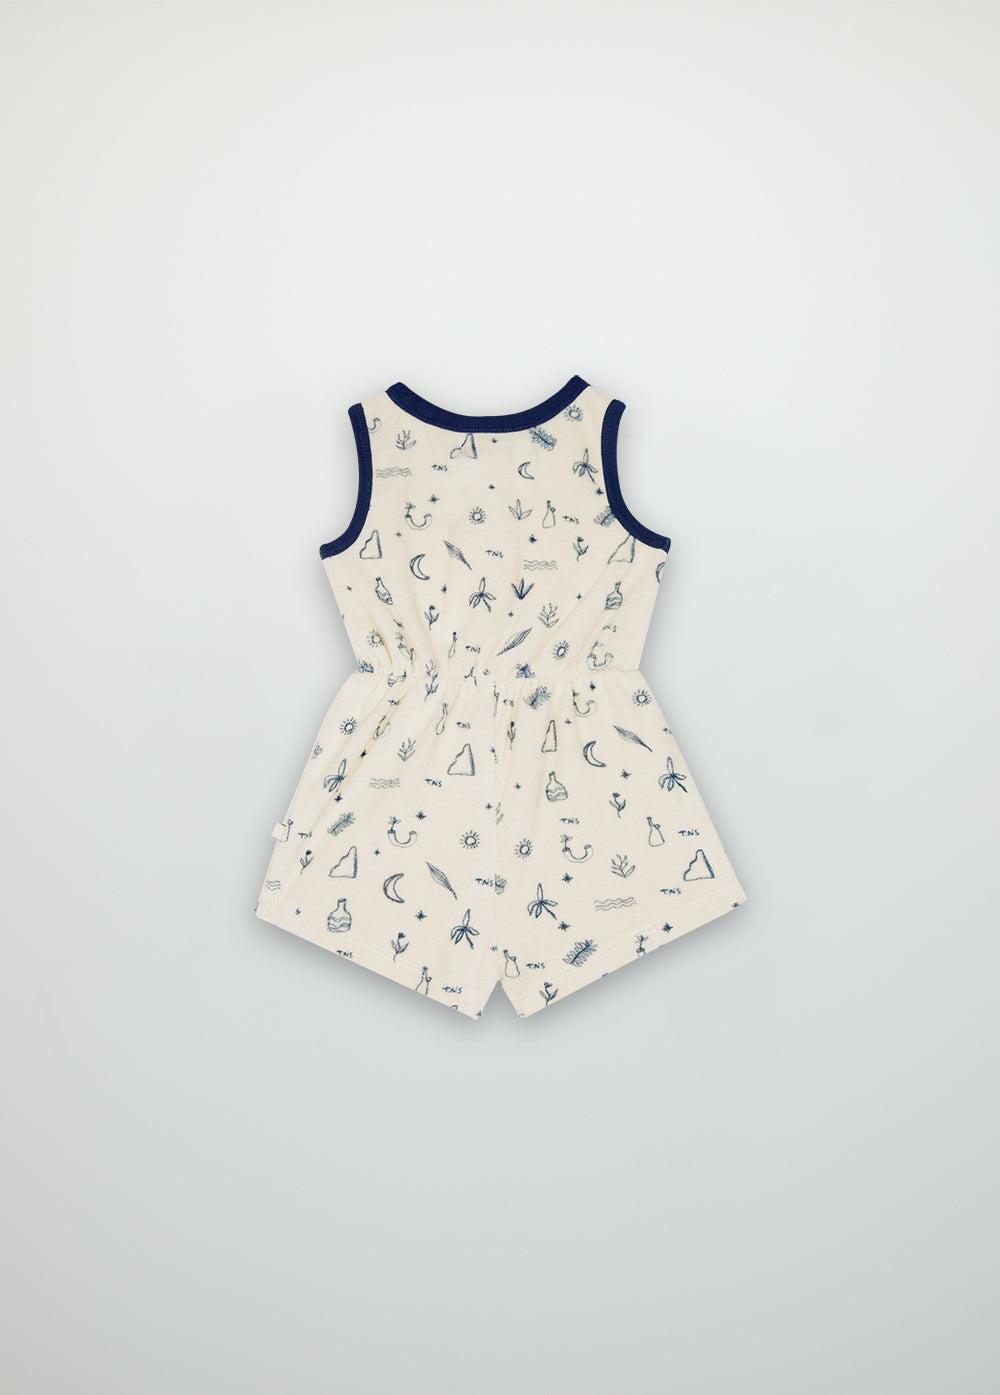 Francis Baby Romper All the things print